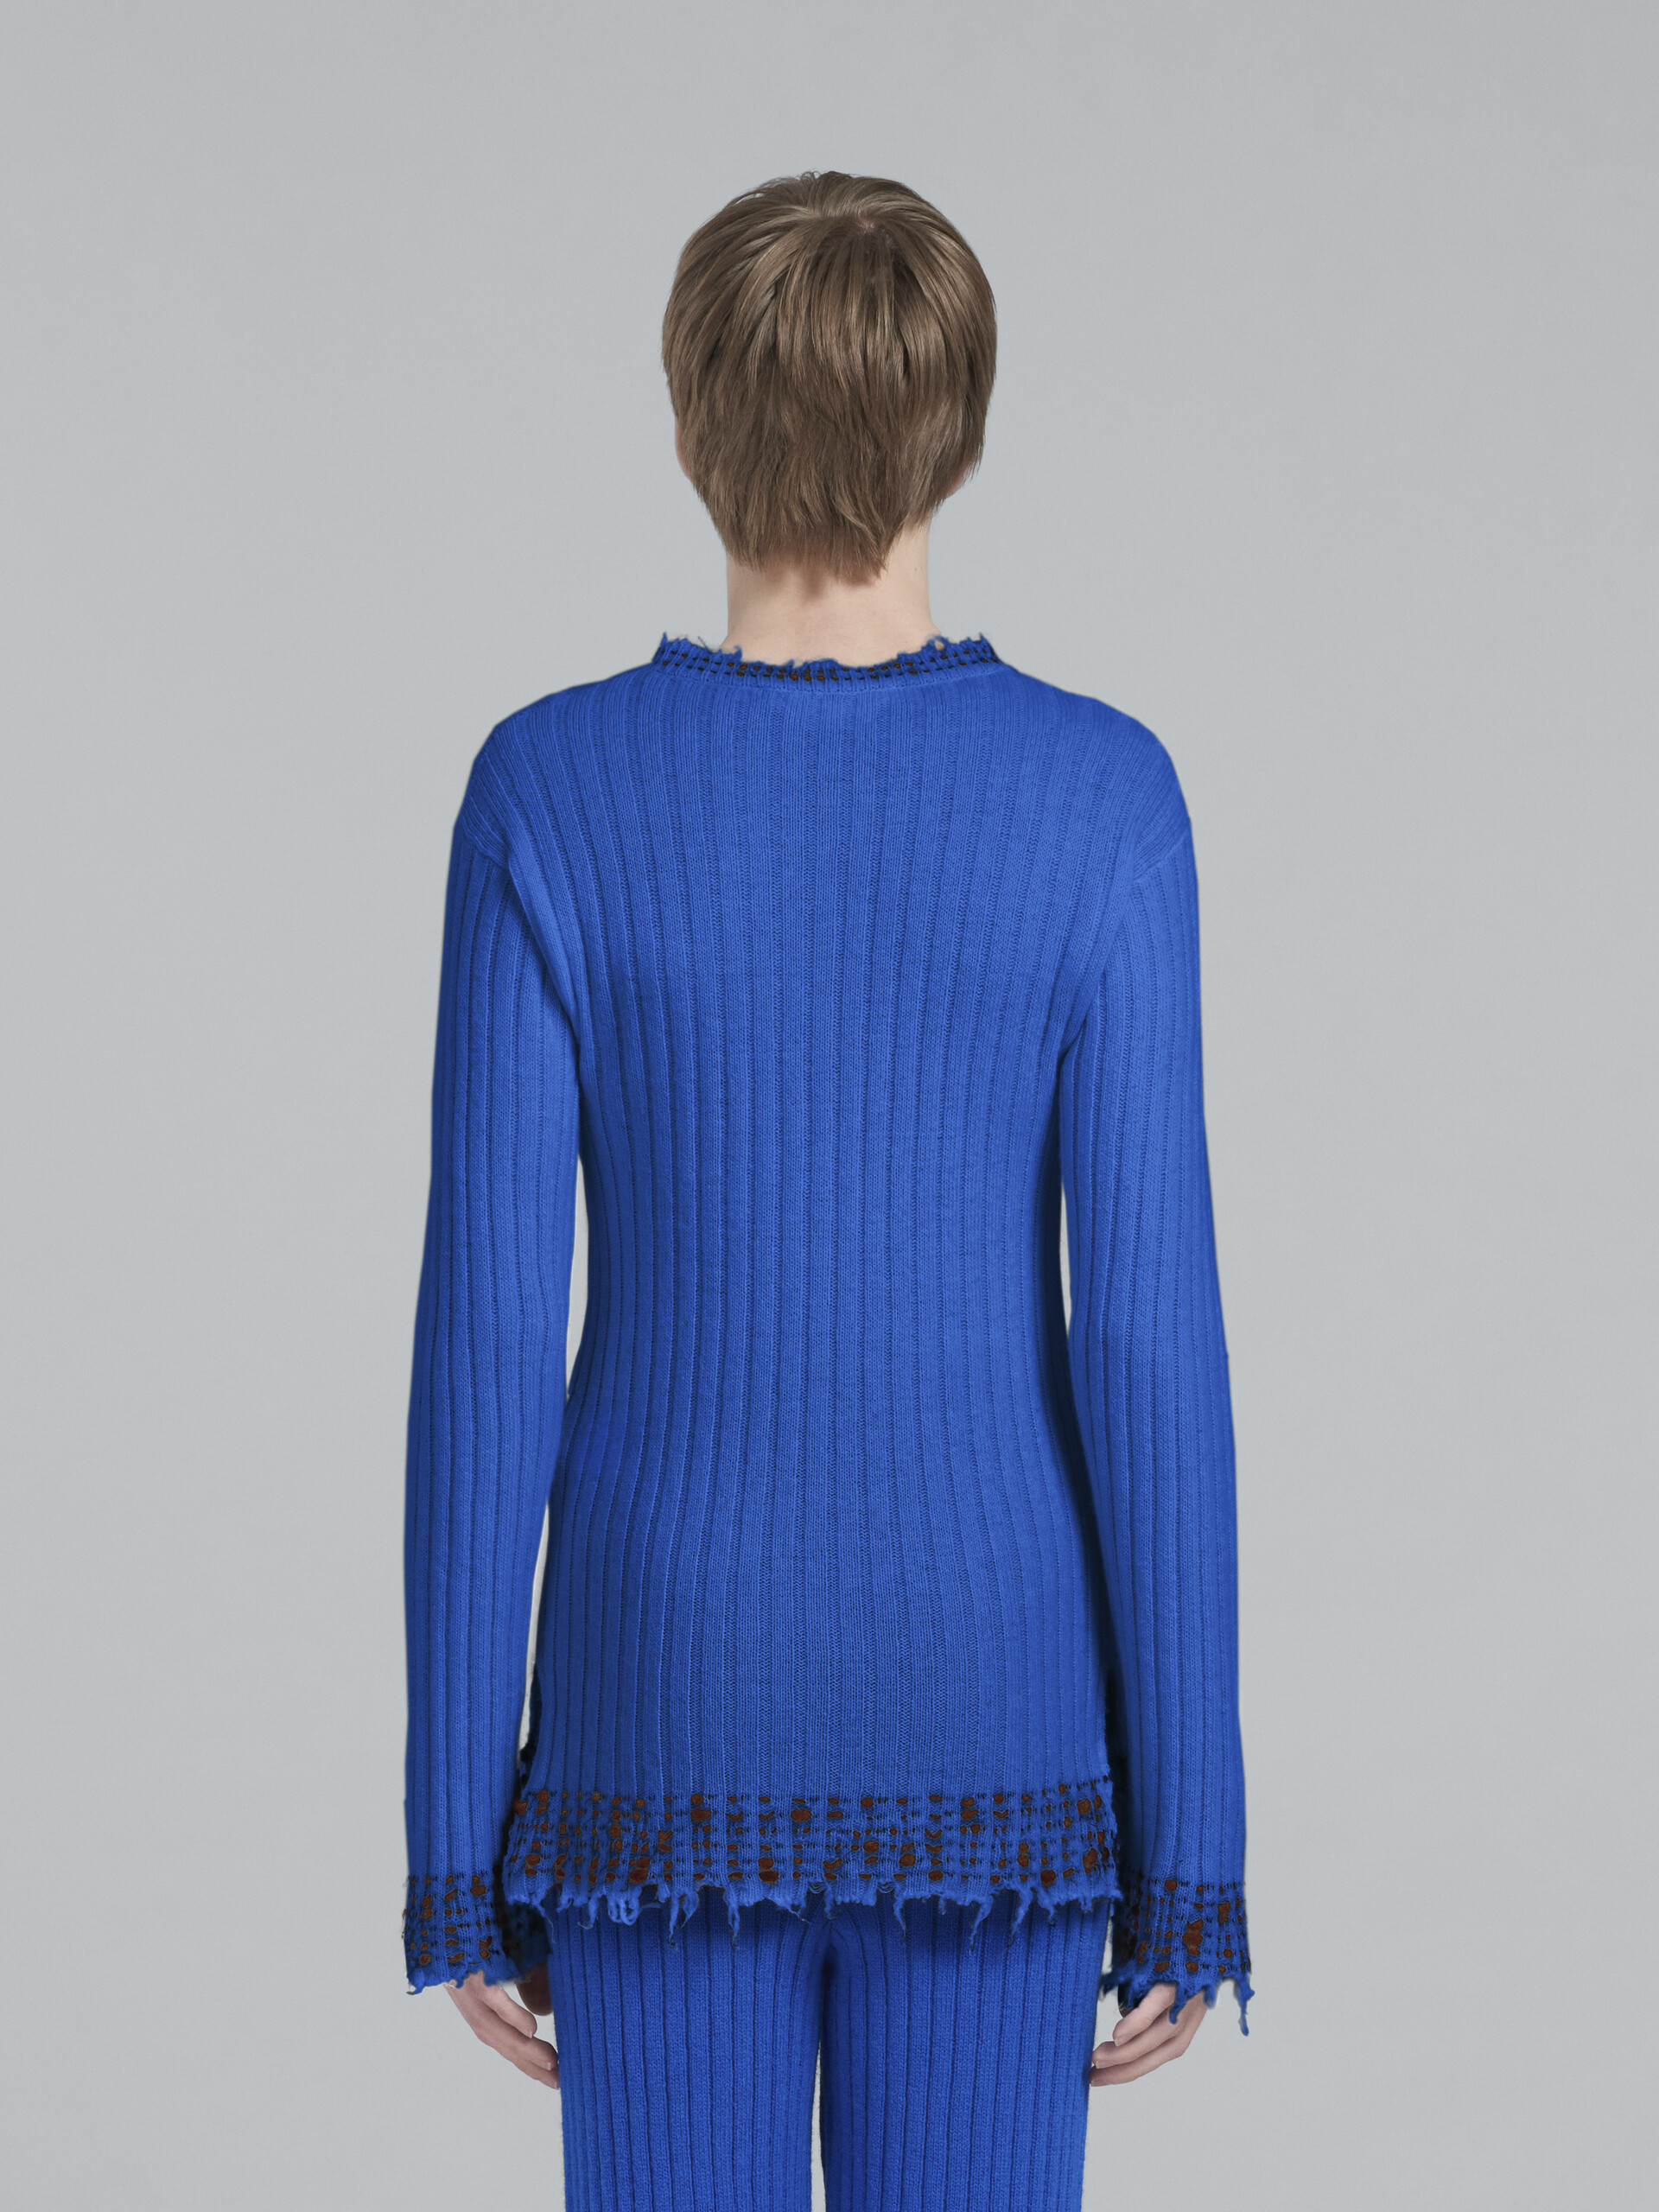 Blue knitted wool sweater - Pullovers - Image 3